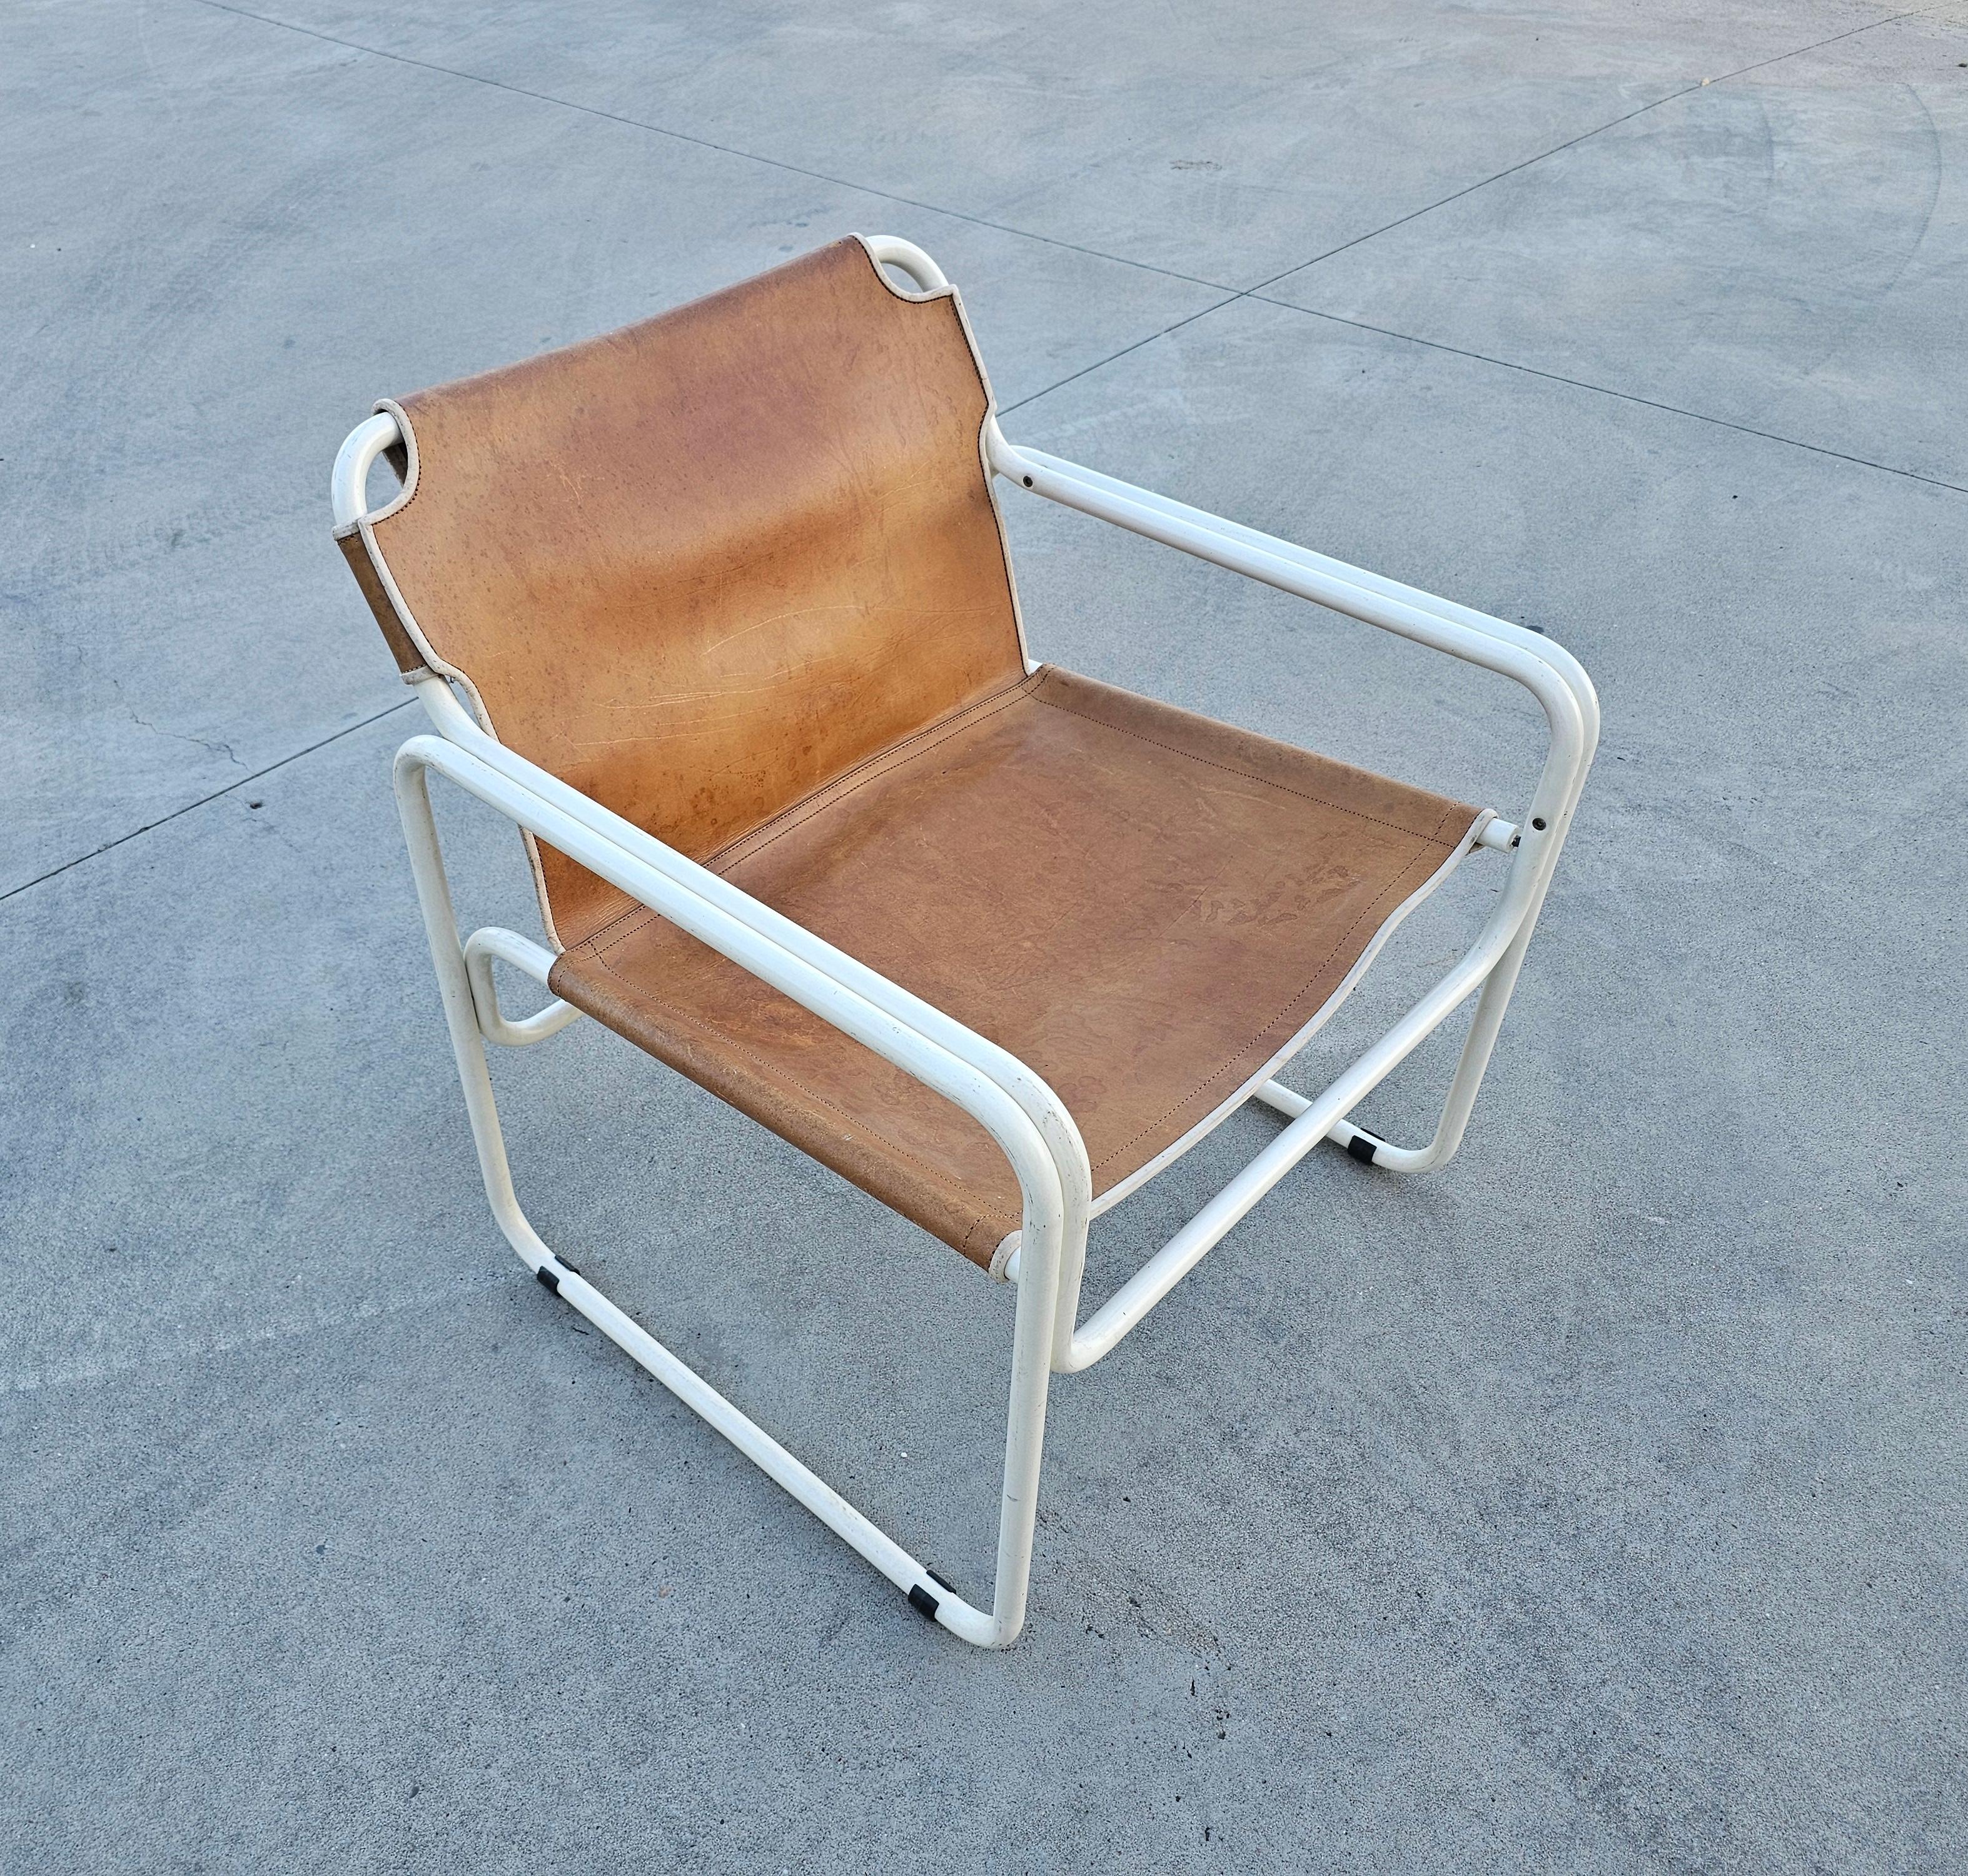 Bauhaus Style Tubular Easy Chairs in Cognac Leather by Jox Interni, 1970s For Sale 1